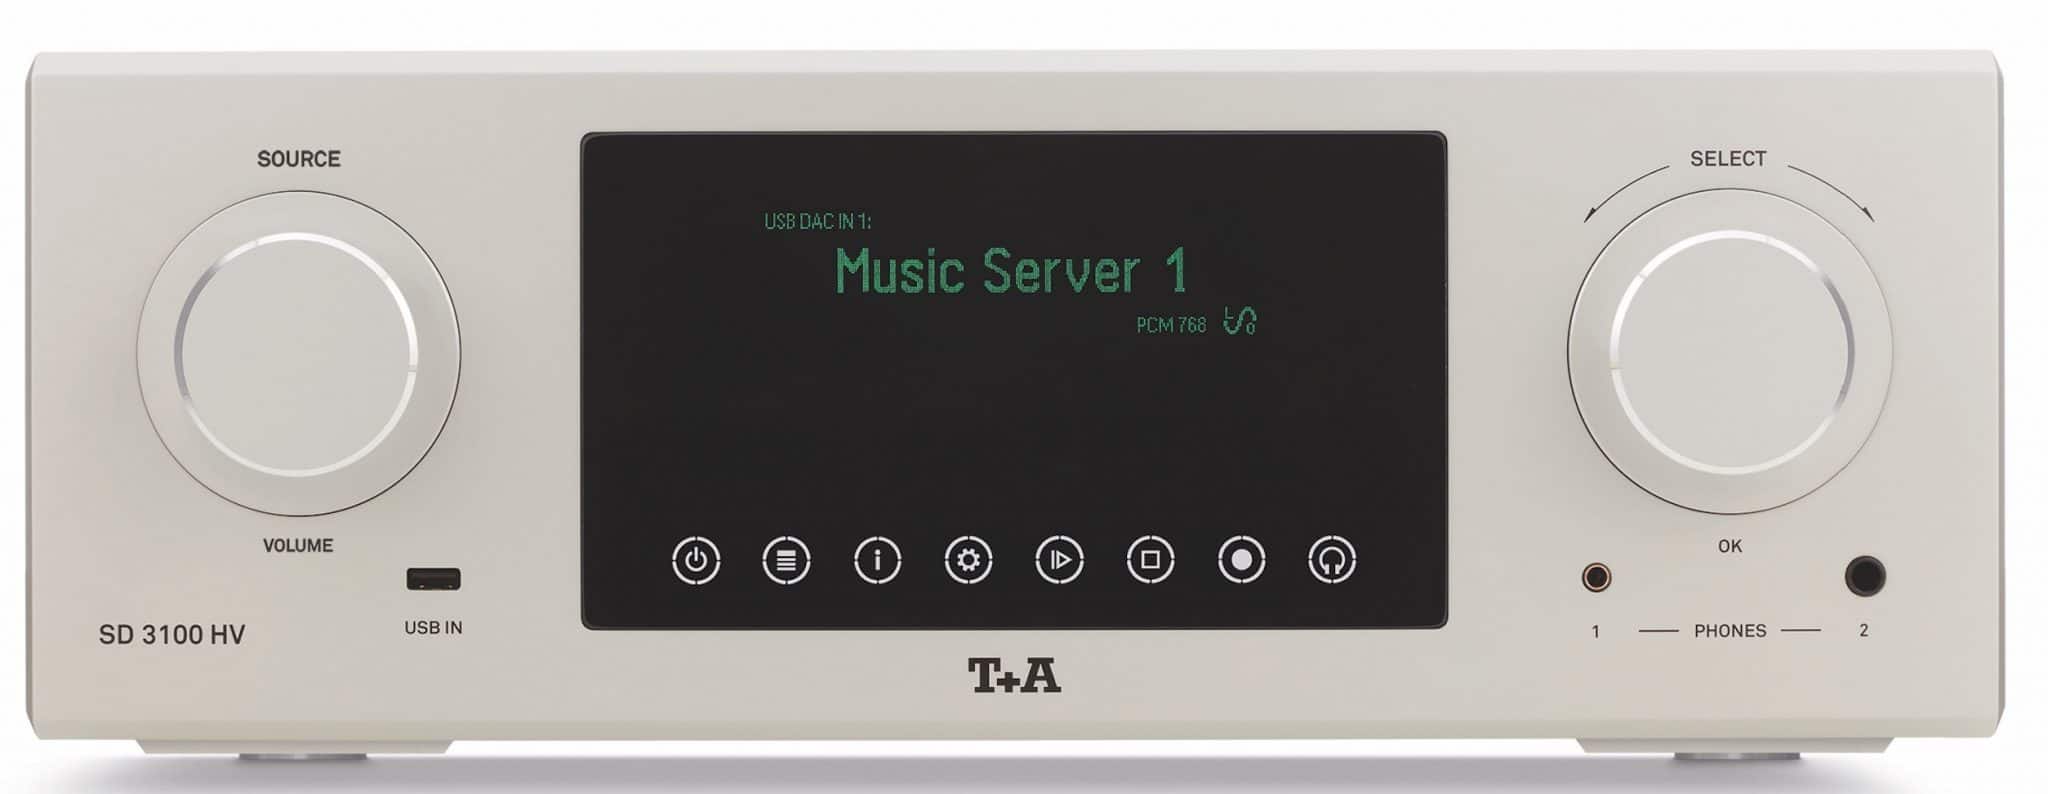 HV DAC/Streamer Plus transport From T+A